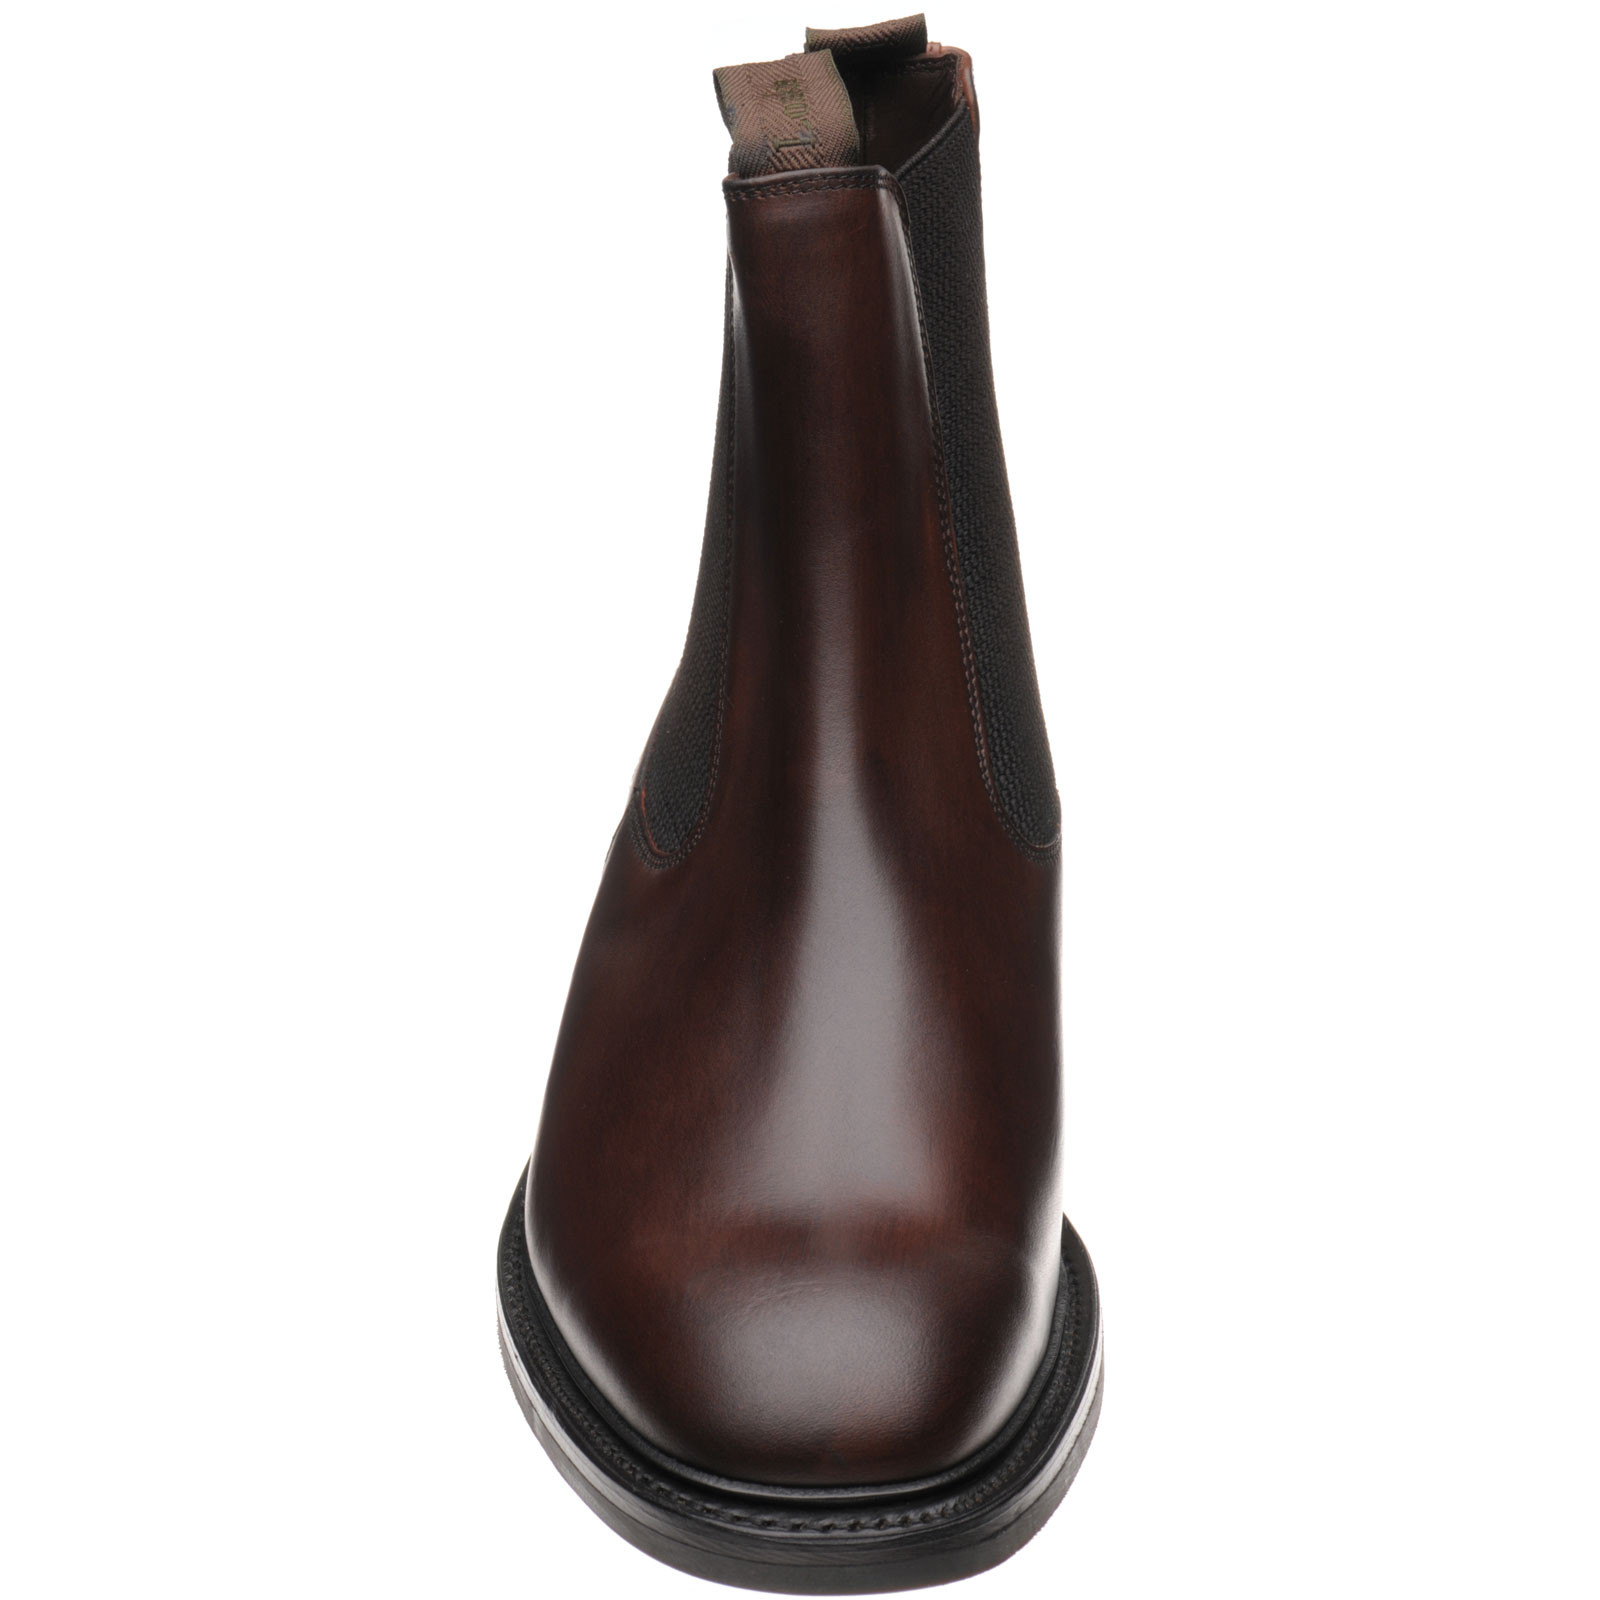 Loake shoes | Loake 1880 | Dingley in Dark Brown at Herring Shoes